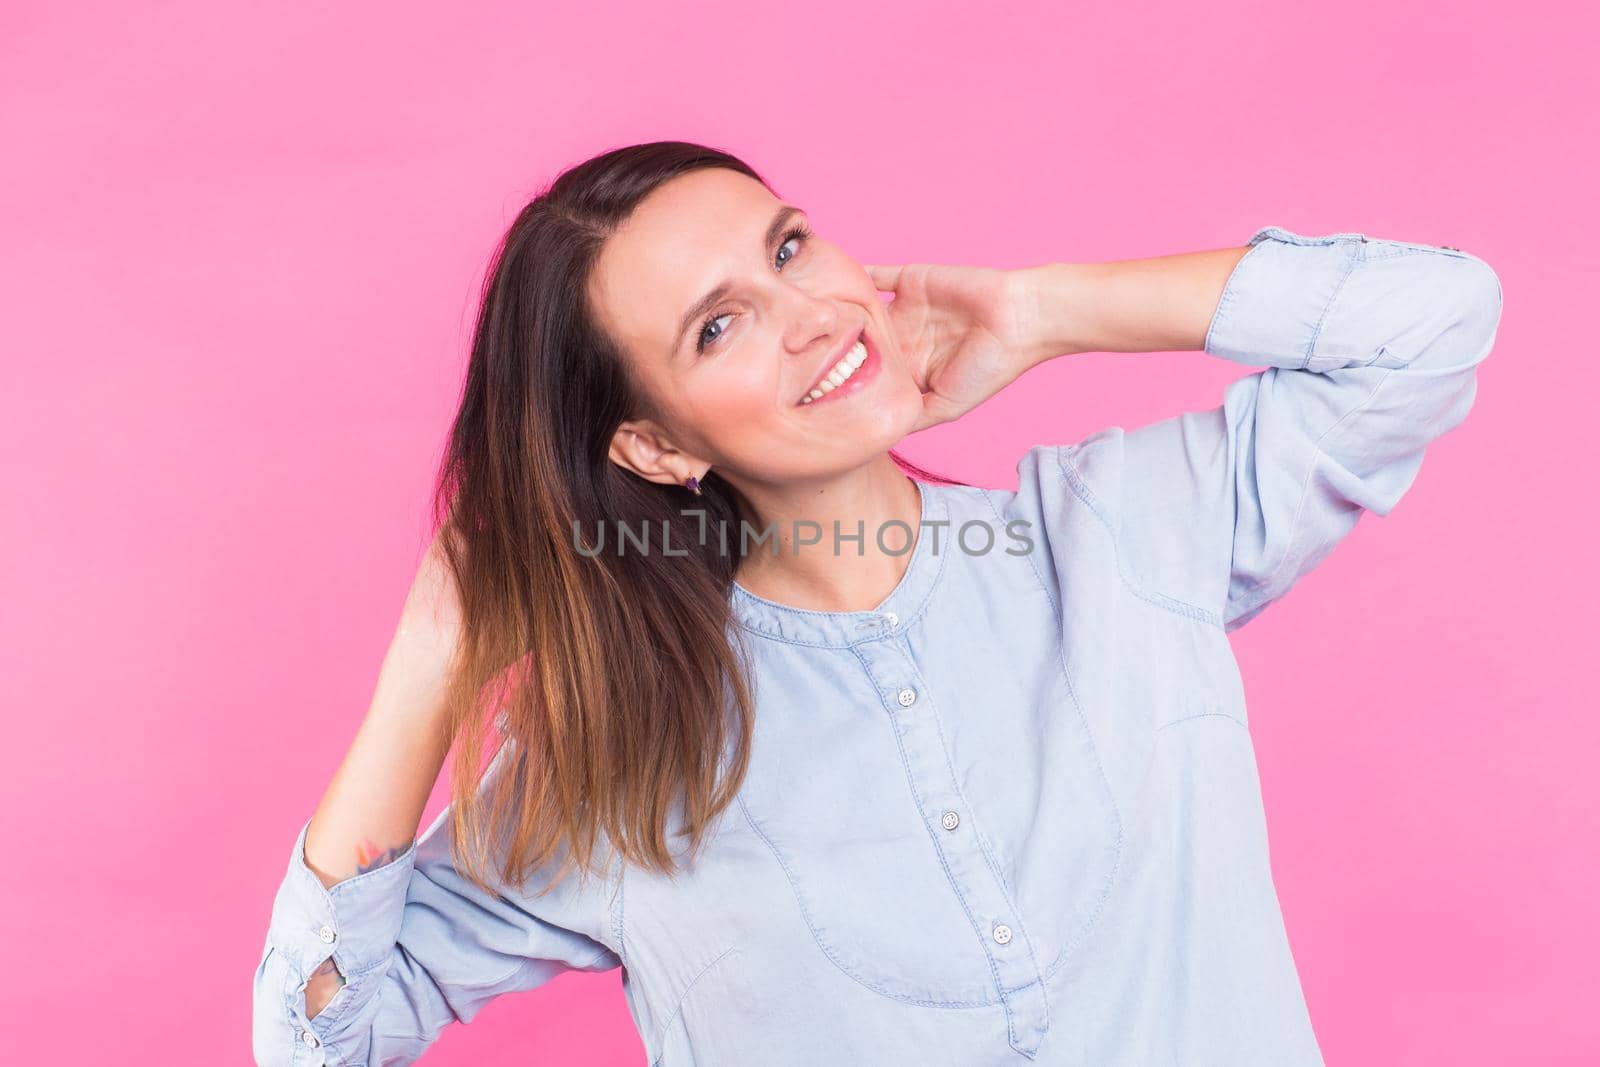 Portrait of a beautiful woman with long brown hair wearing blue cotton blouse, standing waist up smiling on a pink background.